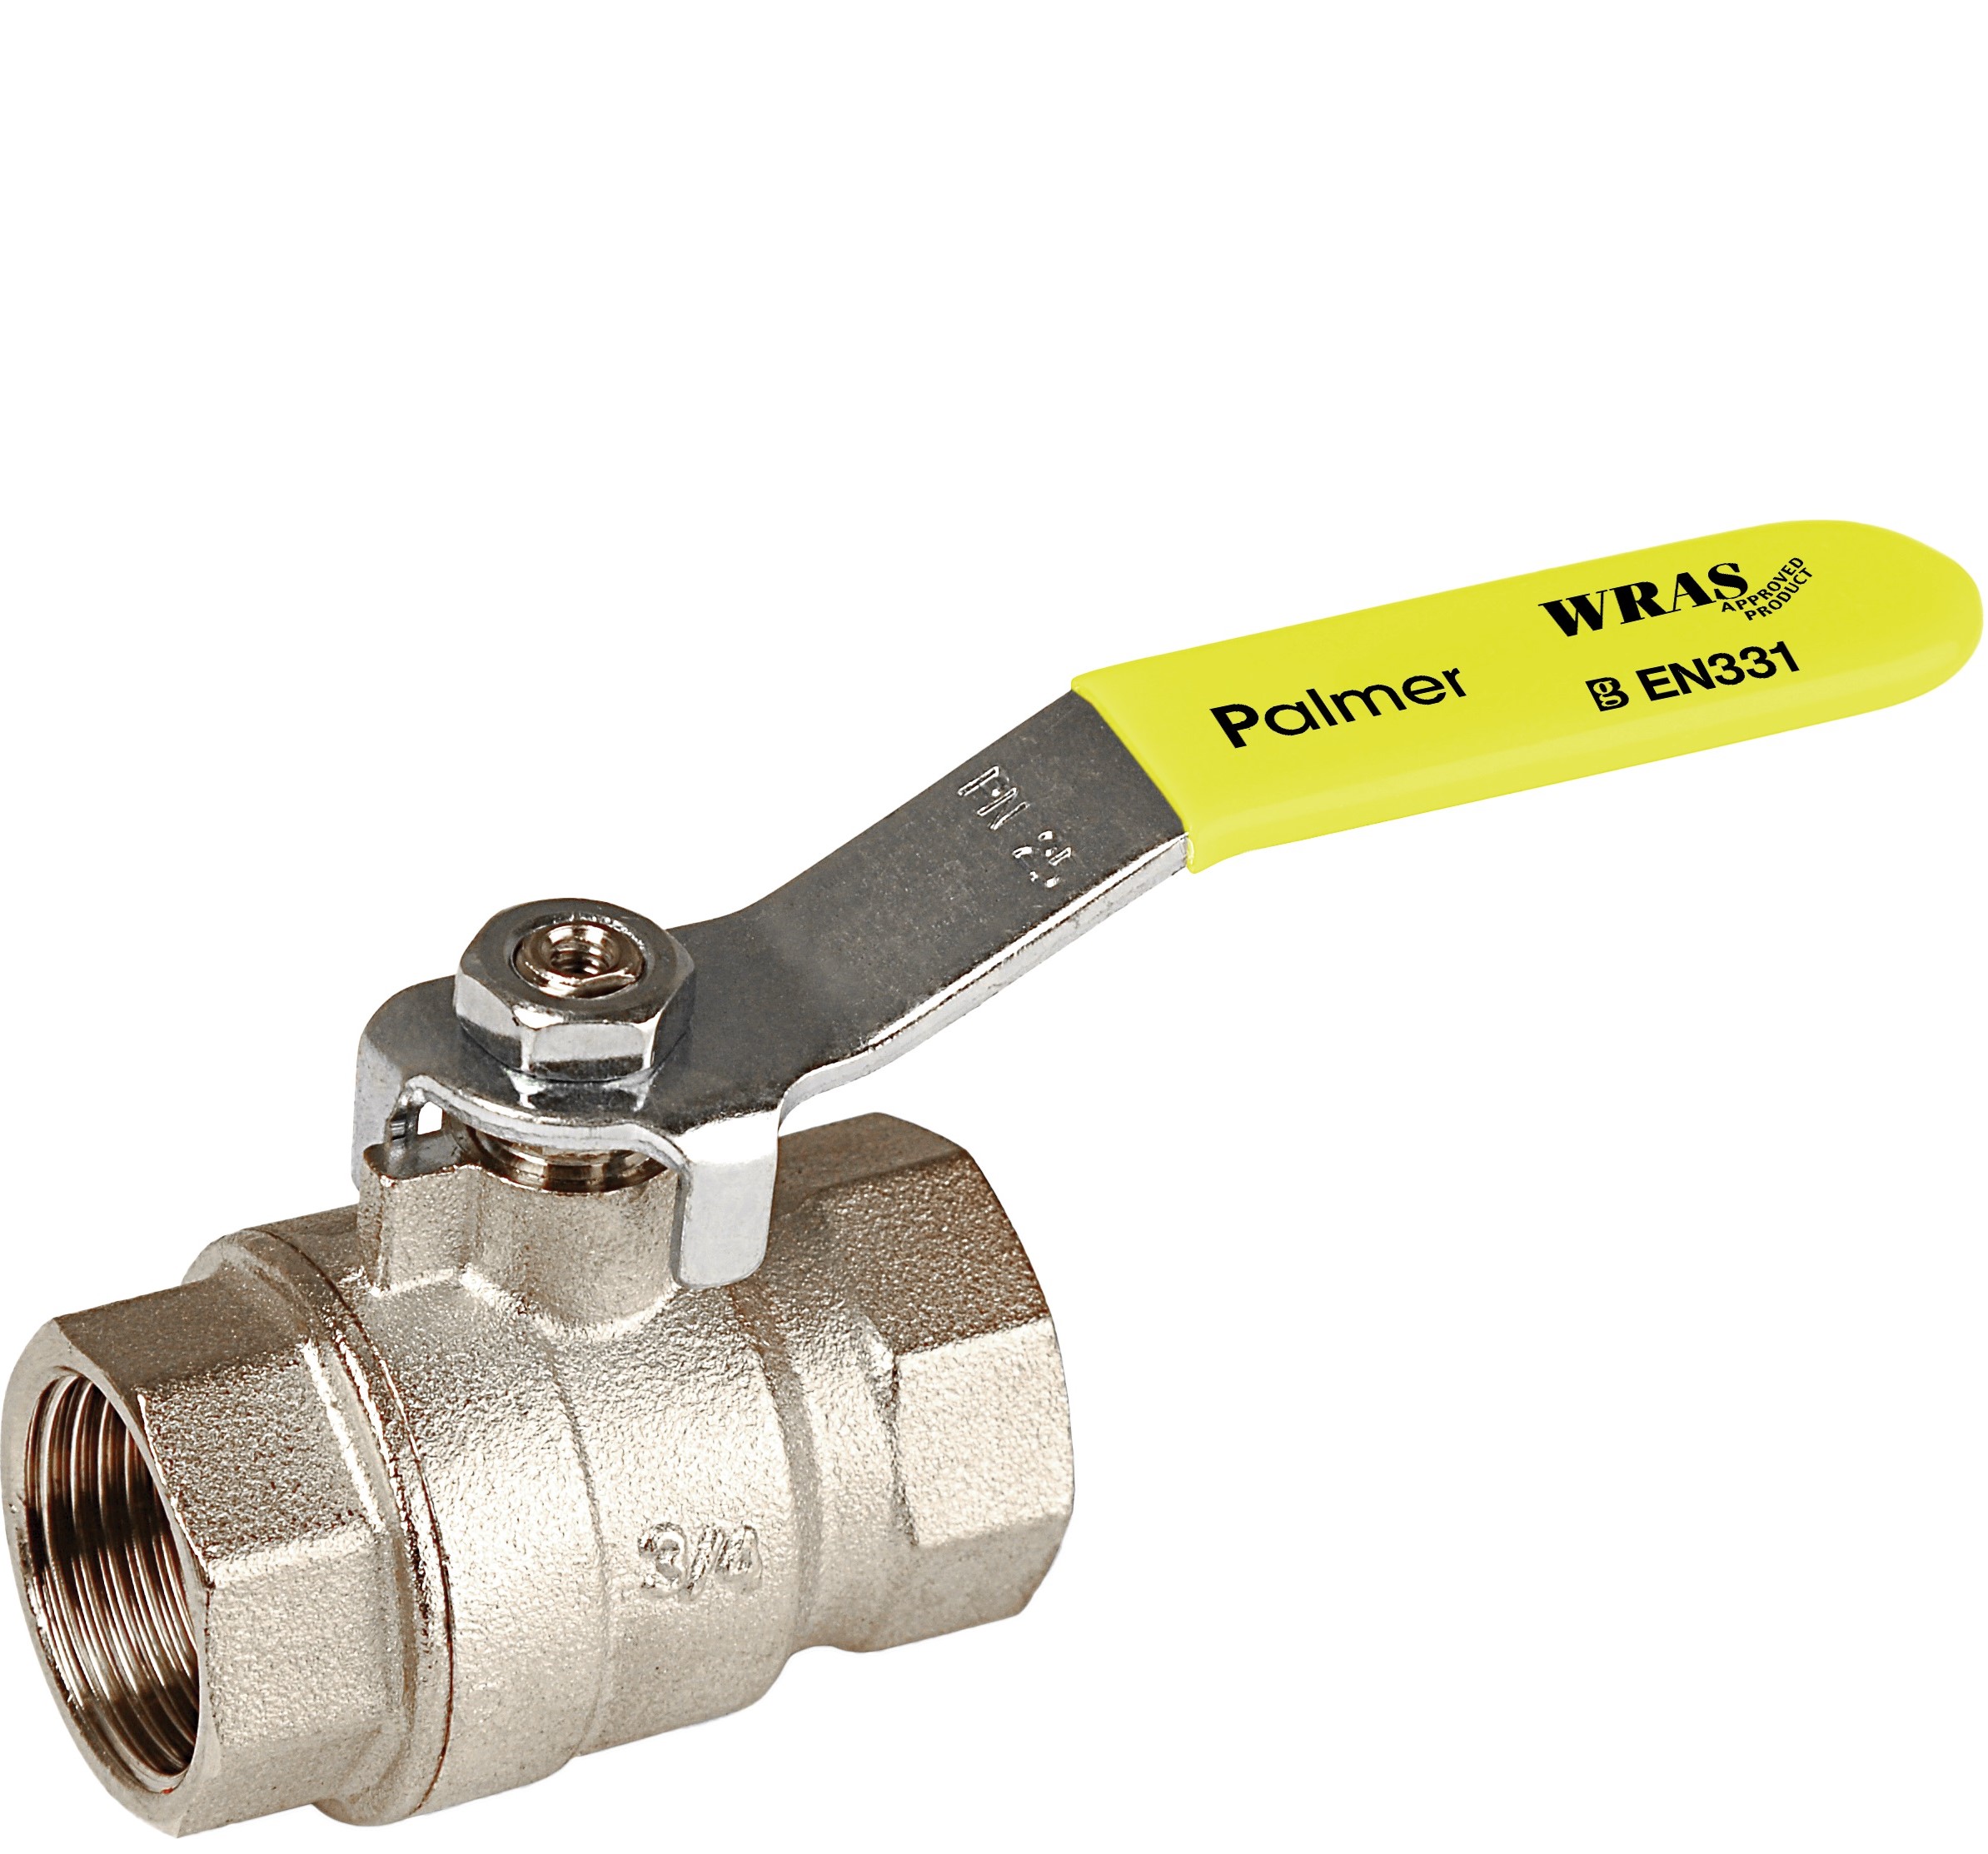 Threaded Lever Ball Valves Yellow Handle Gas